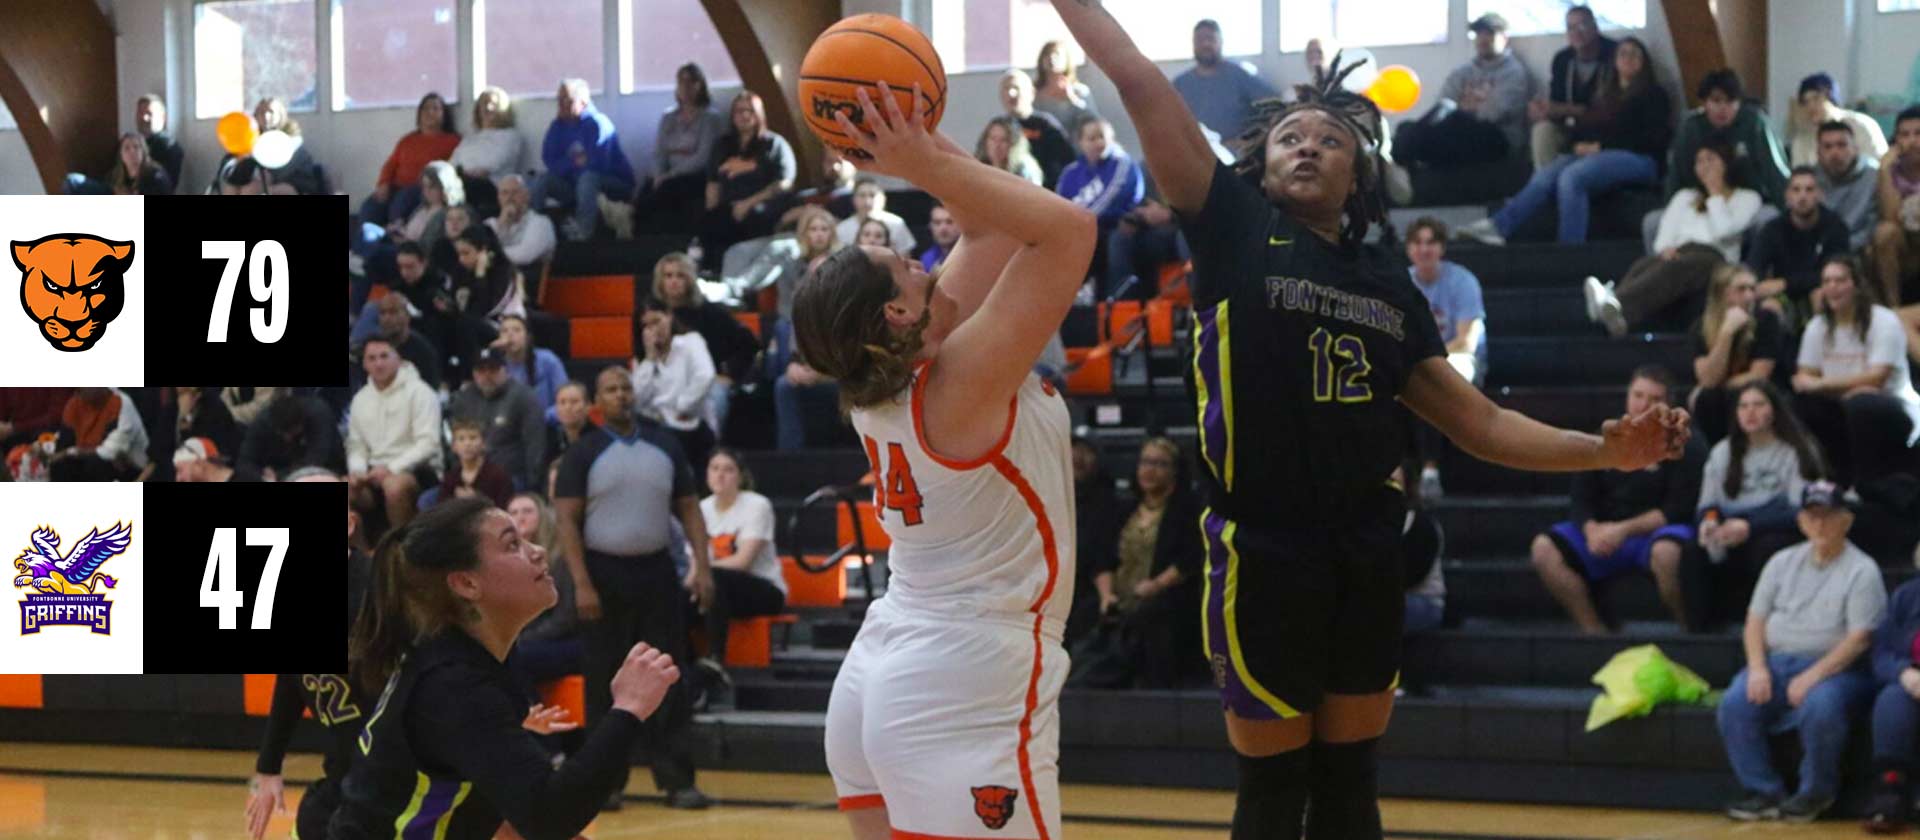 Women's basketball honors senior Cisneros with 79-47 win over Fontbonne